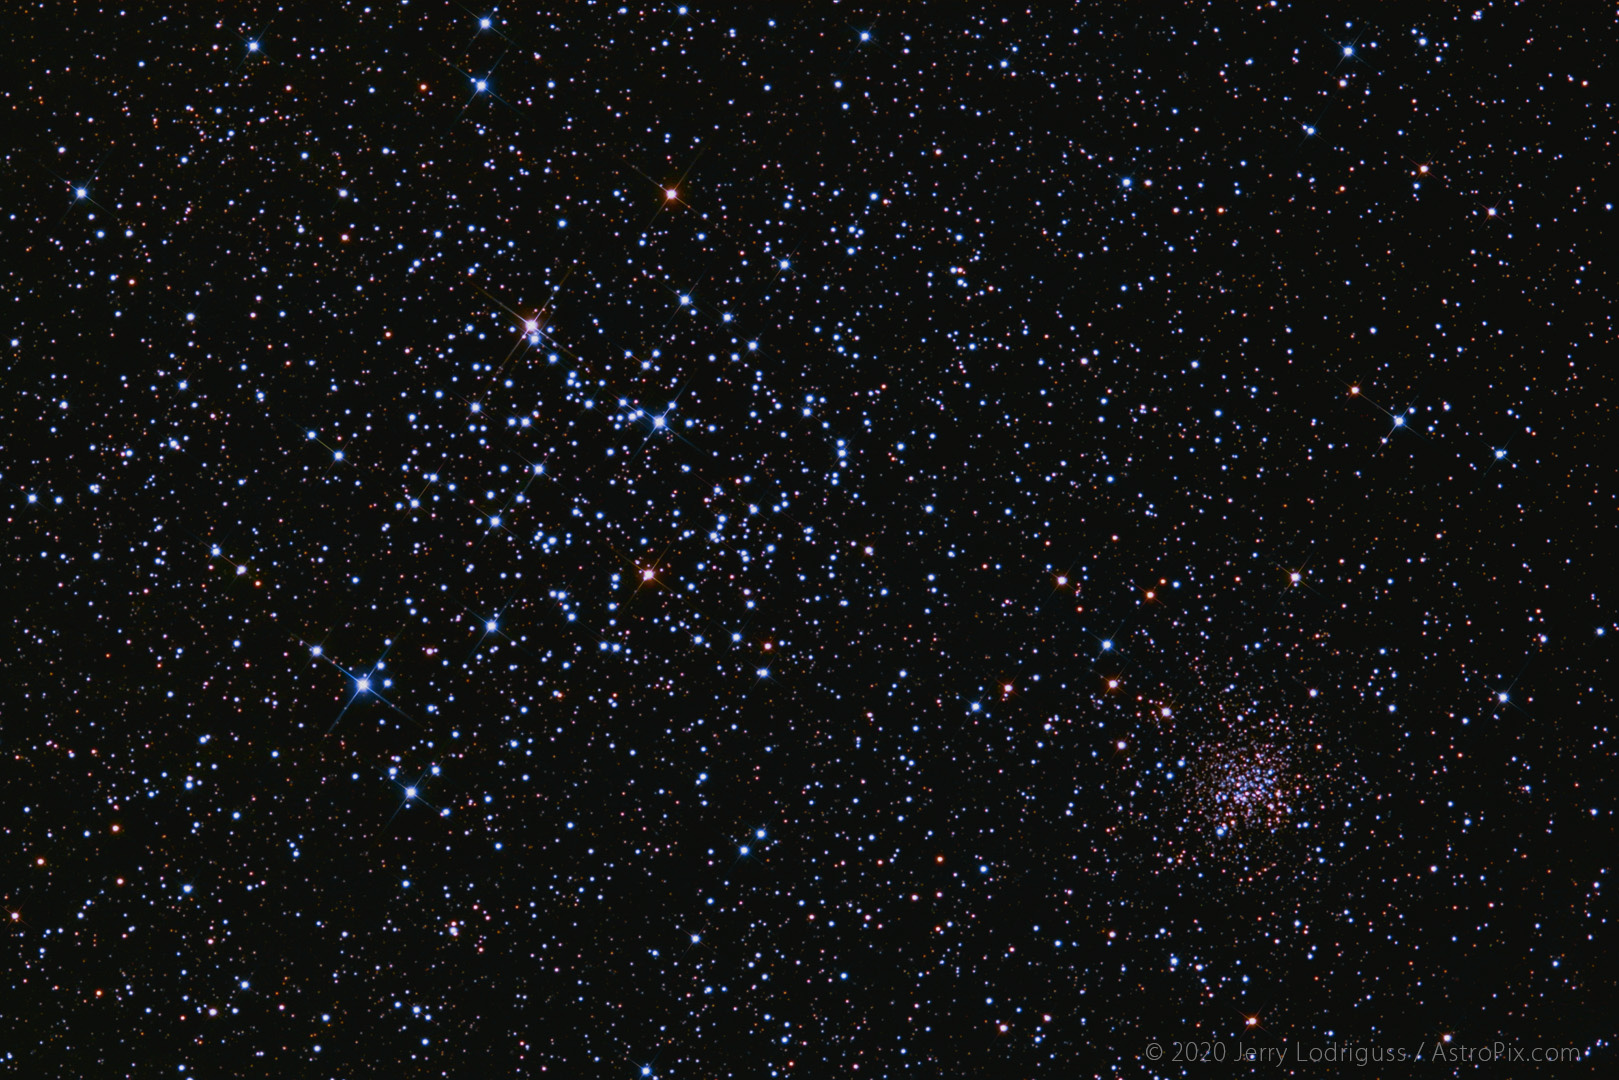 M35 is a spectacular large open cluster containing about 200 stars located in Gemini about 2,800 light years from us. In this image it takes up most of the top left of the frame. Shining at magnitude 5 and with an apparent size as large as the full Moon at 30 arc minutes, it is visible to the unaided eye as a diffuse object off the foot of Gemini. M35 is a relatively young cluster estimated to be about 150 million years old.<br /><br />It is accompanied by a golden jewel-like smaller companion, open cluster NGC 2158, located about 15 arc minutes to the southwest of M35. It is seen at the lower right of the photo. NGC 2158 contains more stars and is more compact than M35. It shines at about magnitude 8.6 and is about 5 arc minutes in angular diameter. It is located 4 or 5 times more distant than M35 and is estimated to be about 1 to 1.5 billion years old. At this age, most of the hot blue stars are gone, leaving mostly older yellow stars.